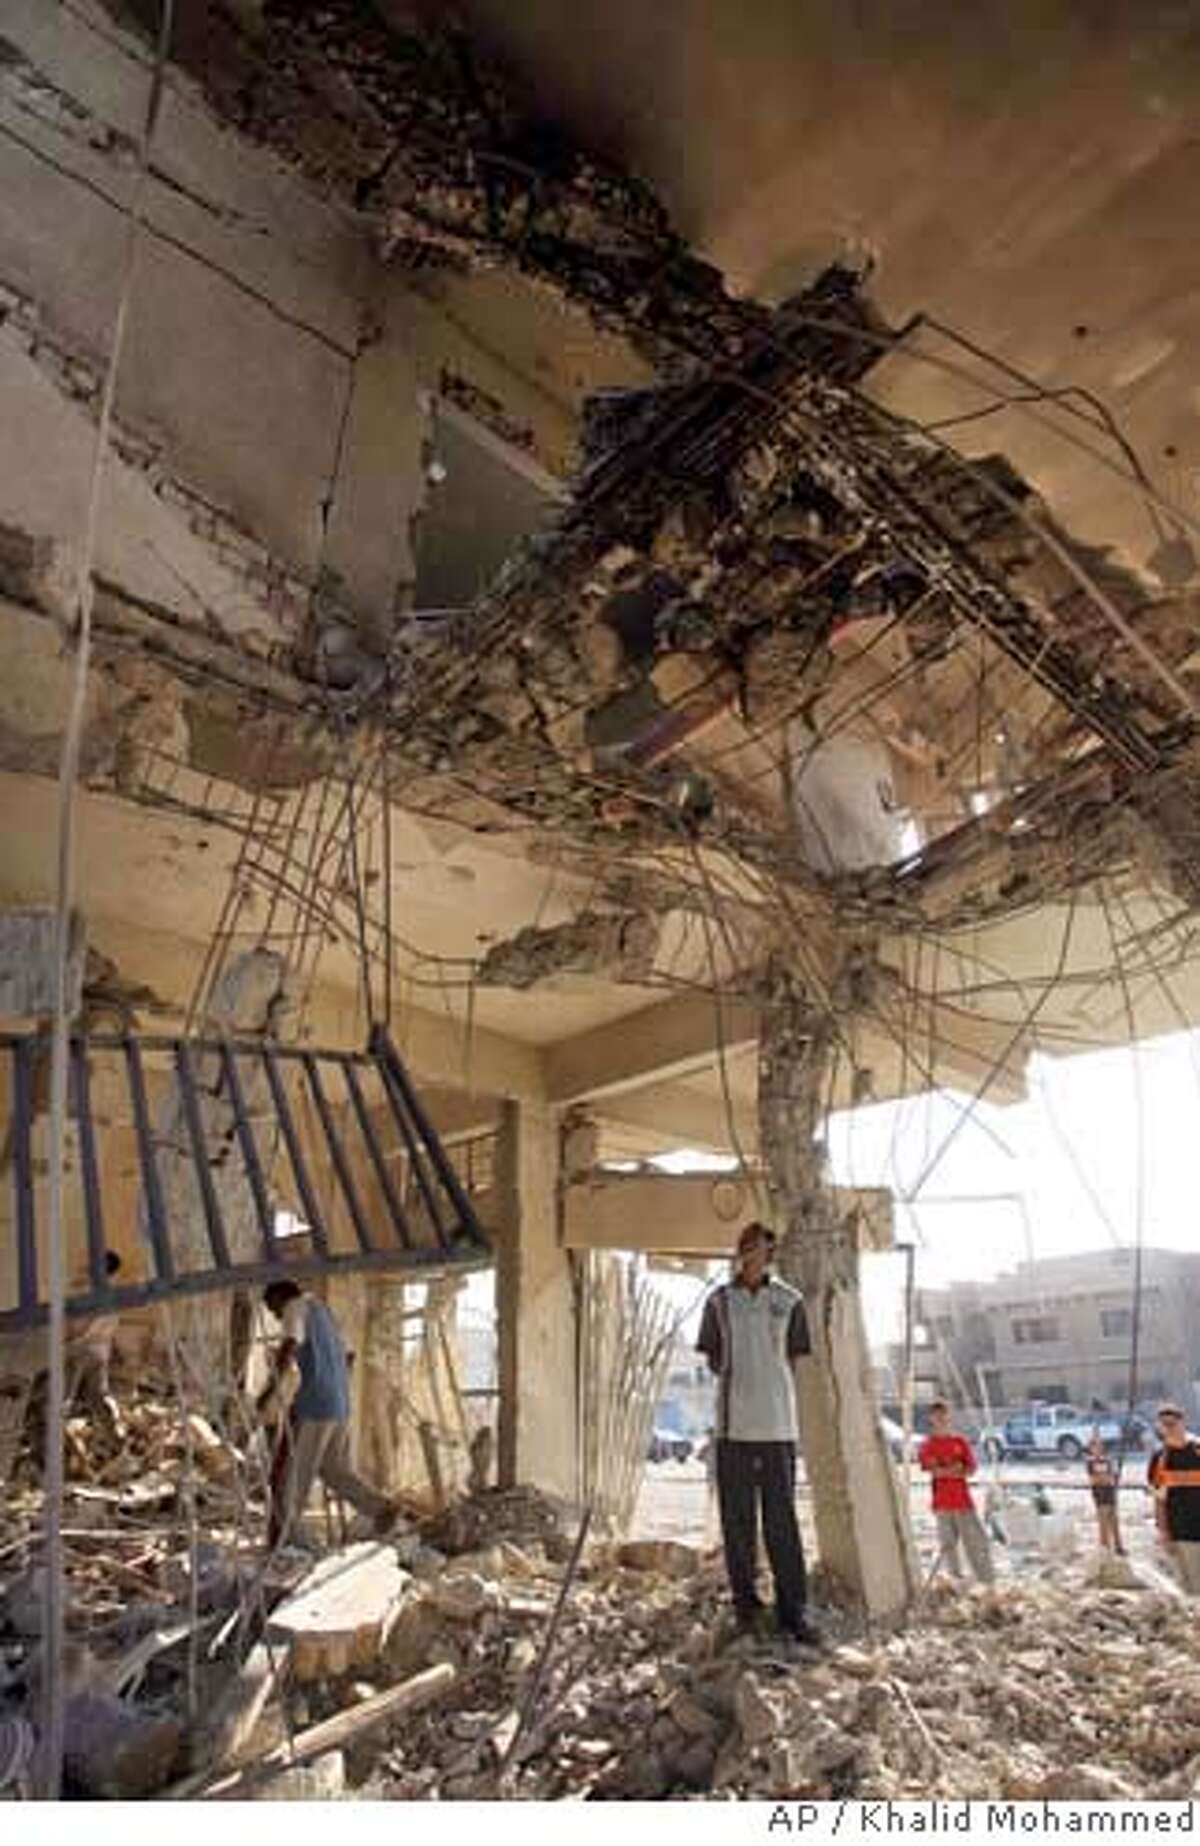 A resident views a big hole in the ceiling of his building following a bomb blast inside one of the apartments on Thursday, in Baghdad, Iraq, Friday Sept. 1, 2006. A barrage of coordinated bomb and rocket attacks on Aug. 31, 2006, across eastern Baghdad neighborhoods killed at least 55 people and wounded more than 200 within about half an hour, police said Friday.The attacks on mainly Shiite neighborhoods came even as Prime Minister Nouri al-Maliki said Iraqi forces should have control over most of the country by year's end. (AP Photo/Khalid Mohammed)